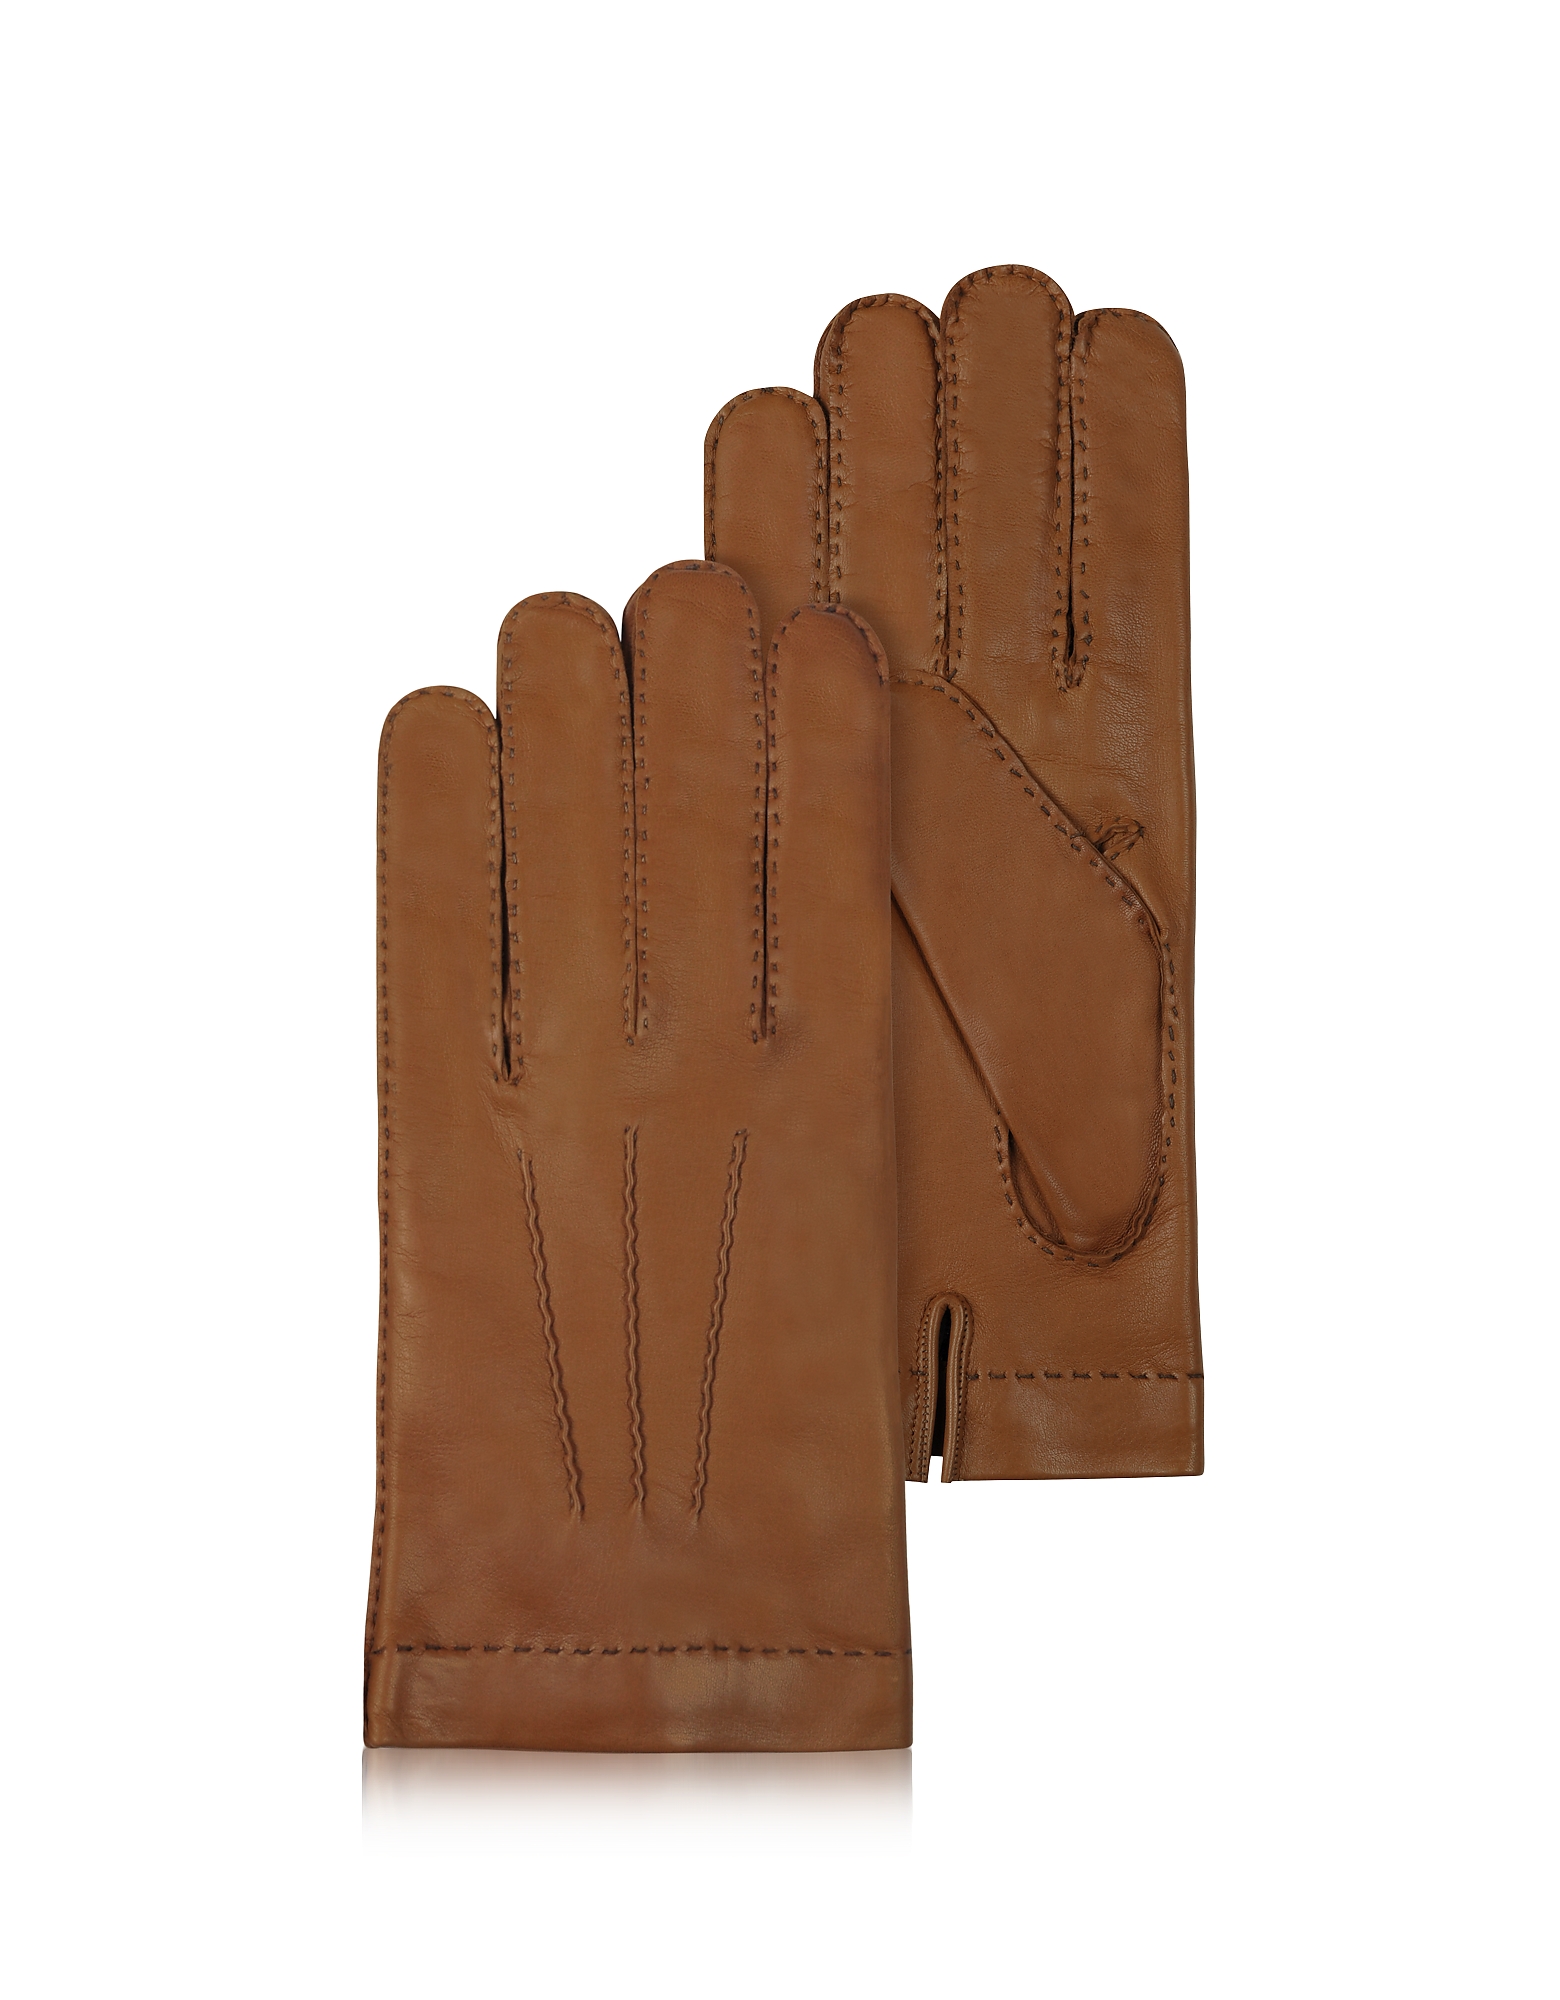 Forzieri Men's Gloves Men's Cashmere Lined Brown Italian Leather Gloves